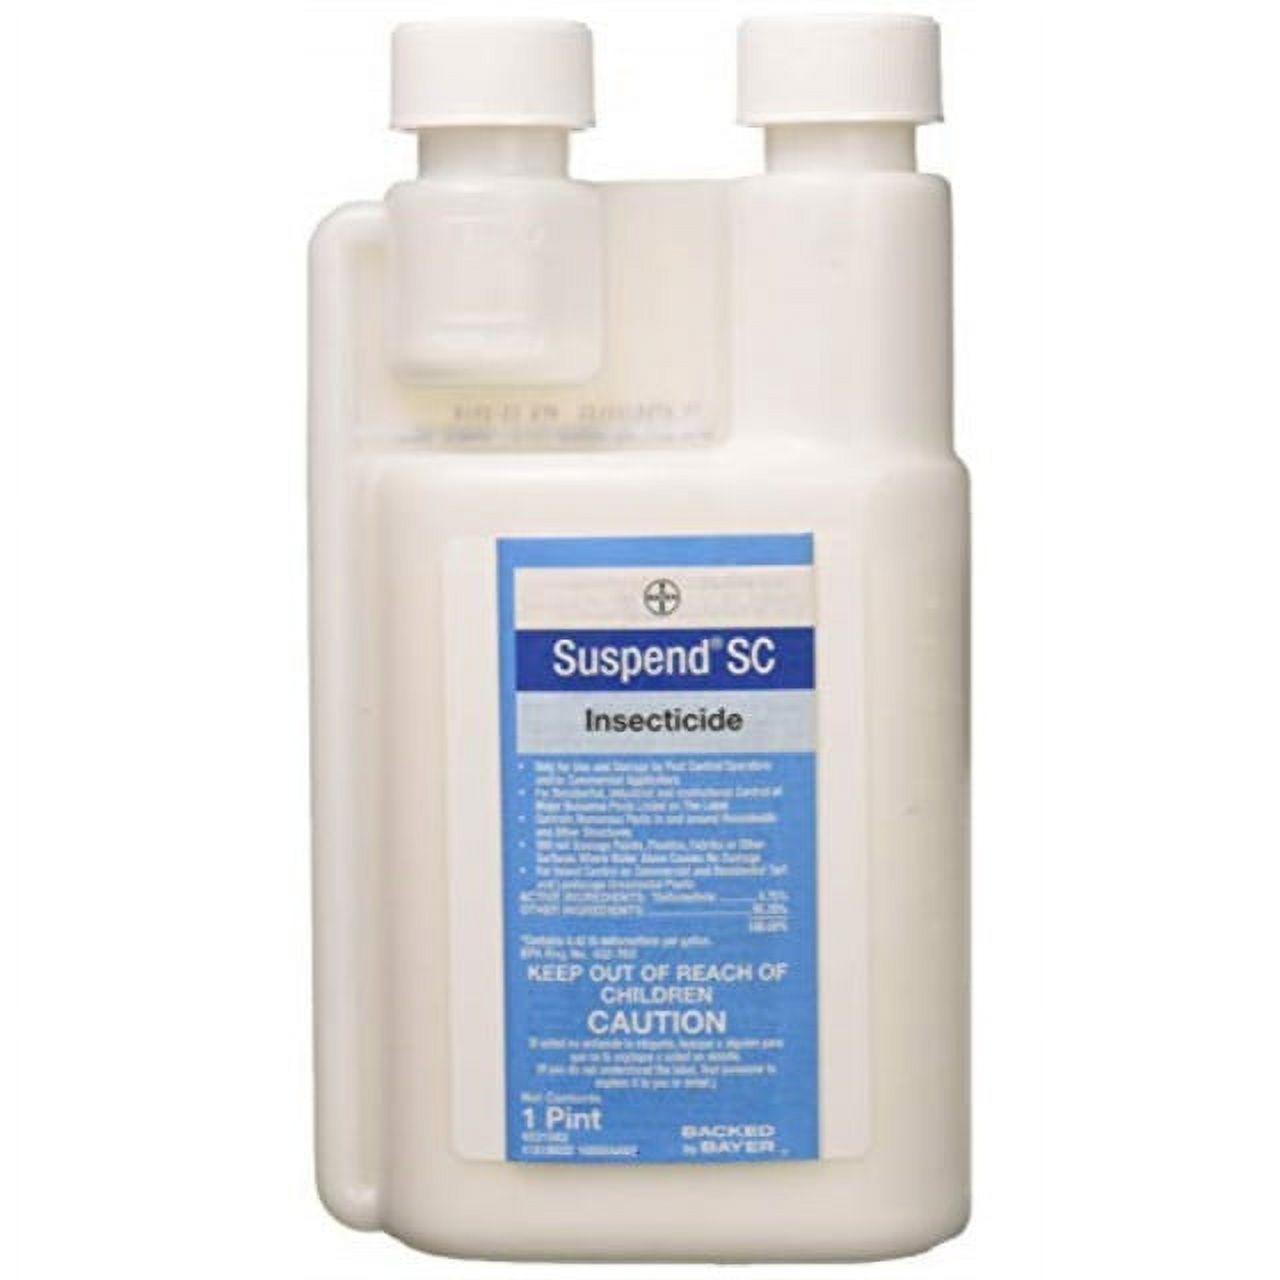 bayer - 4031982 - suspend sc -insecticide - 16oz - image 1 of 1